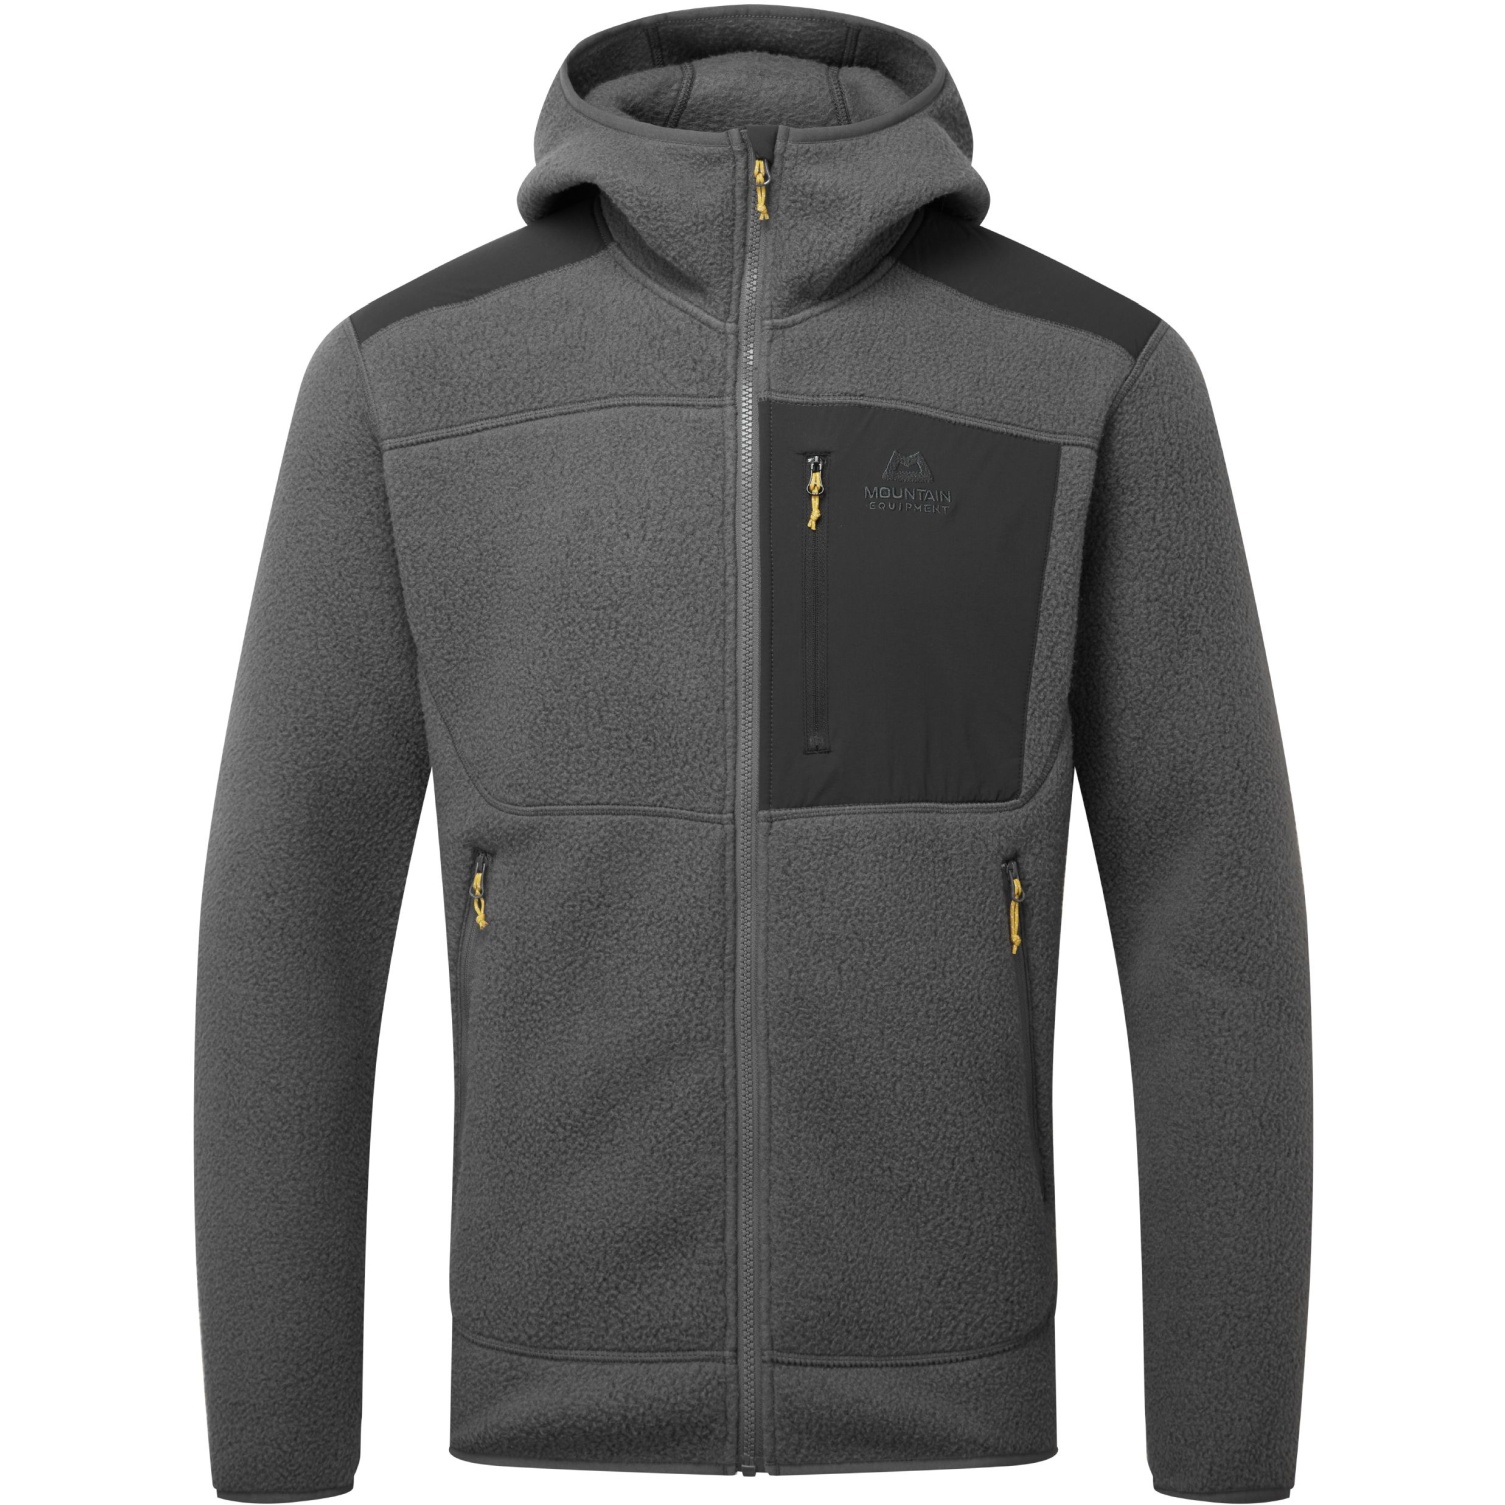 Picture of Mountain Equipment Highpile Hooded Jacket Men ME-006925 - anvil grey/black